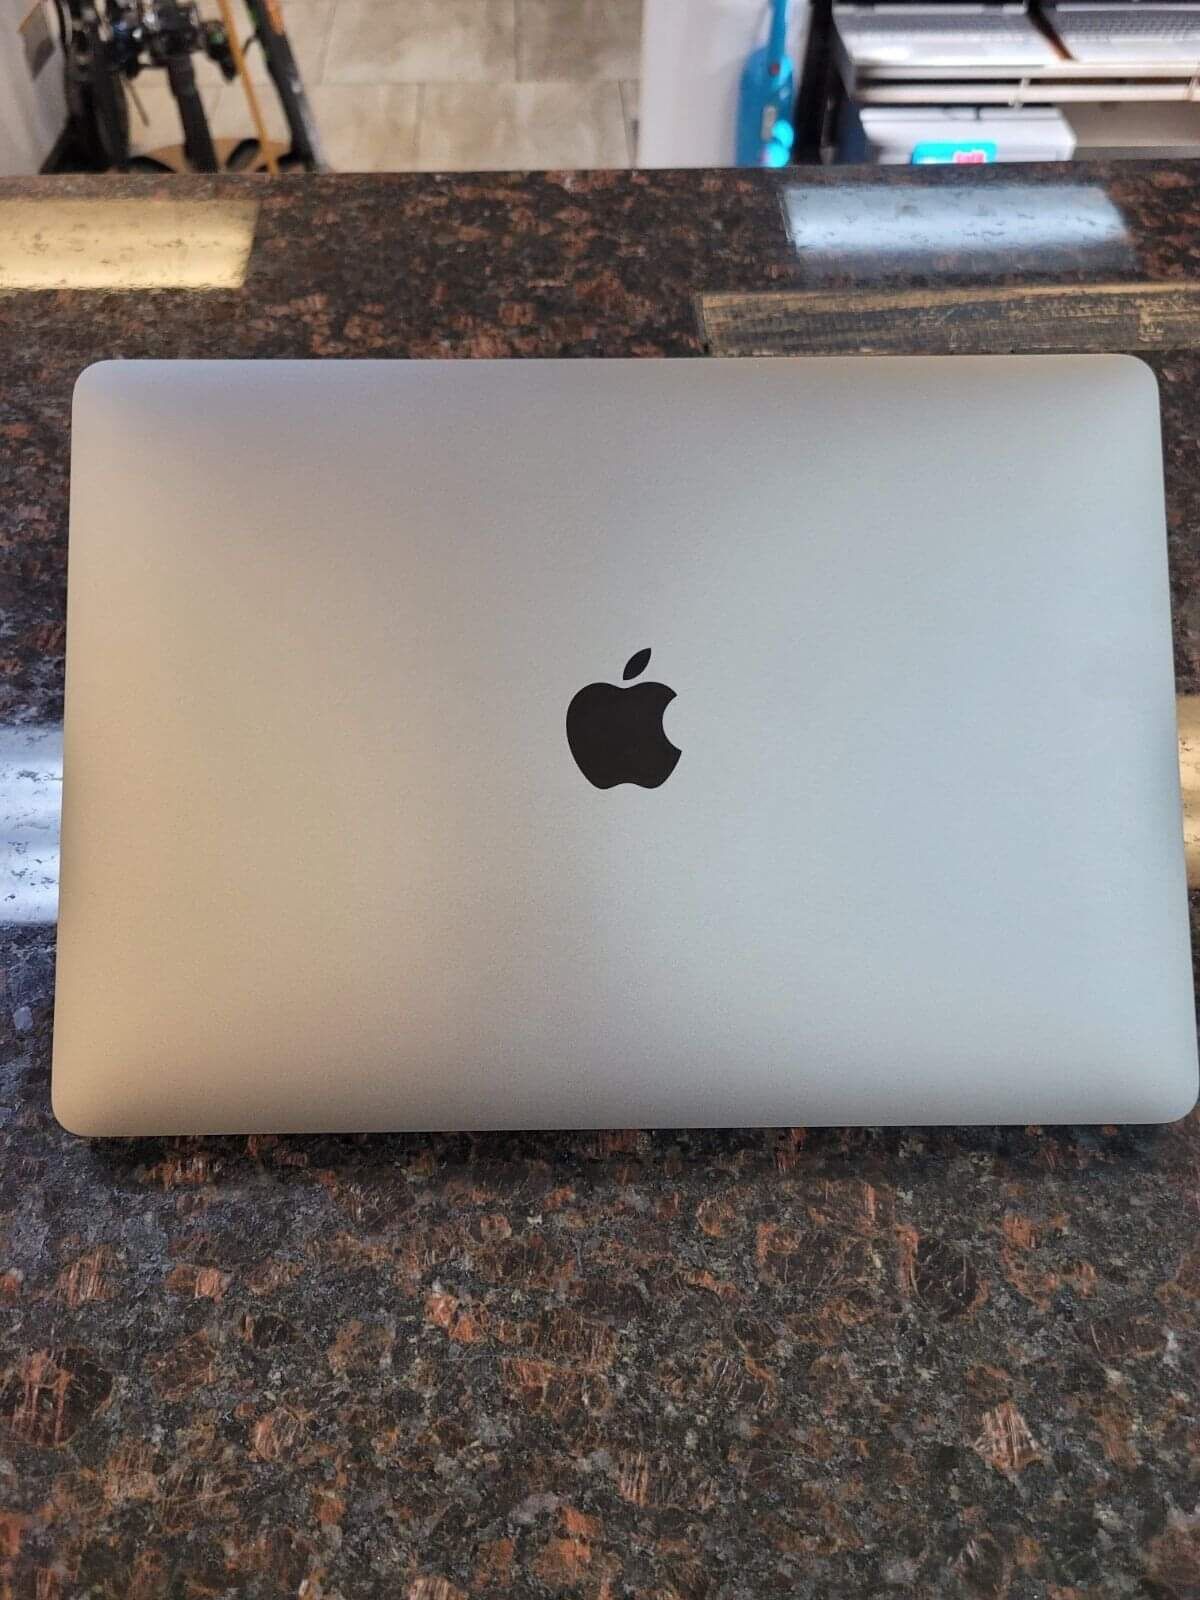 Apple Macbook Laptop 2020 - Perfect Condition with Retina Display - 256 SSD - For Sale or Trade